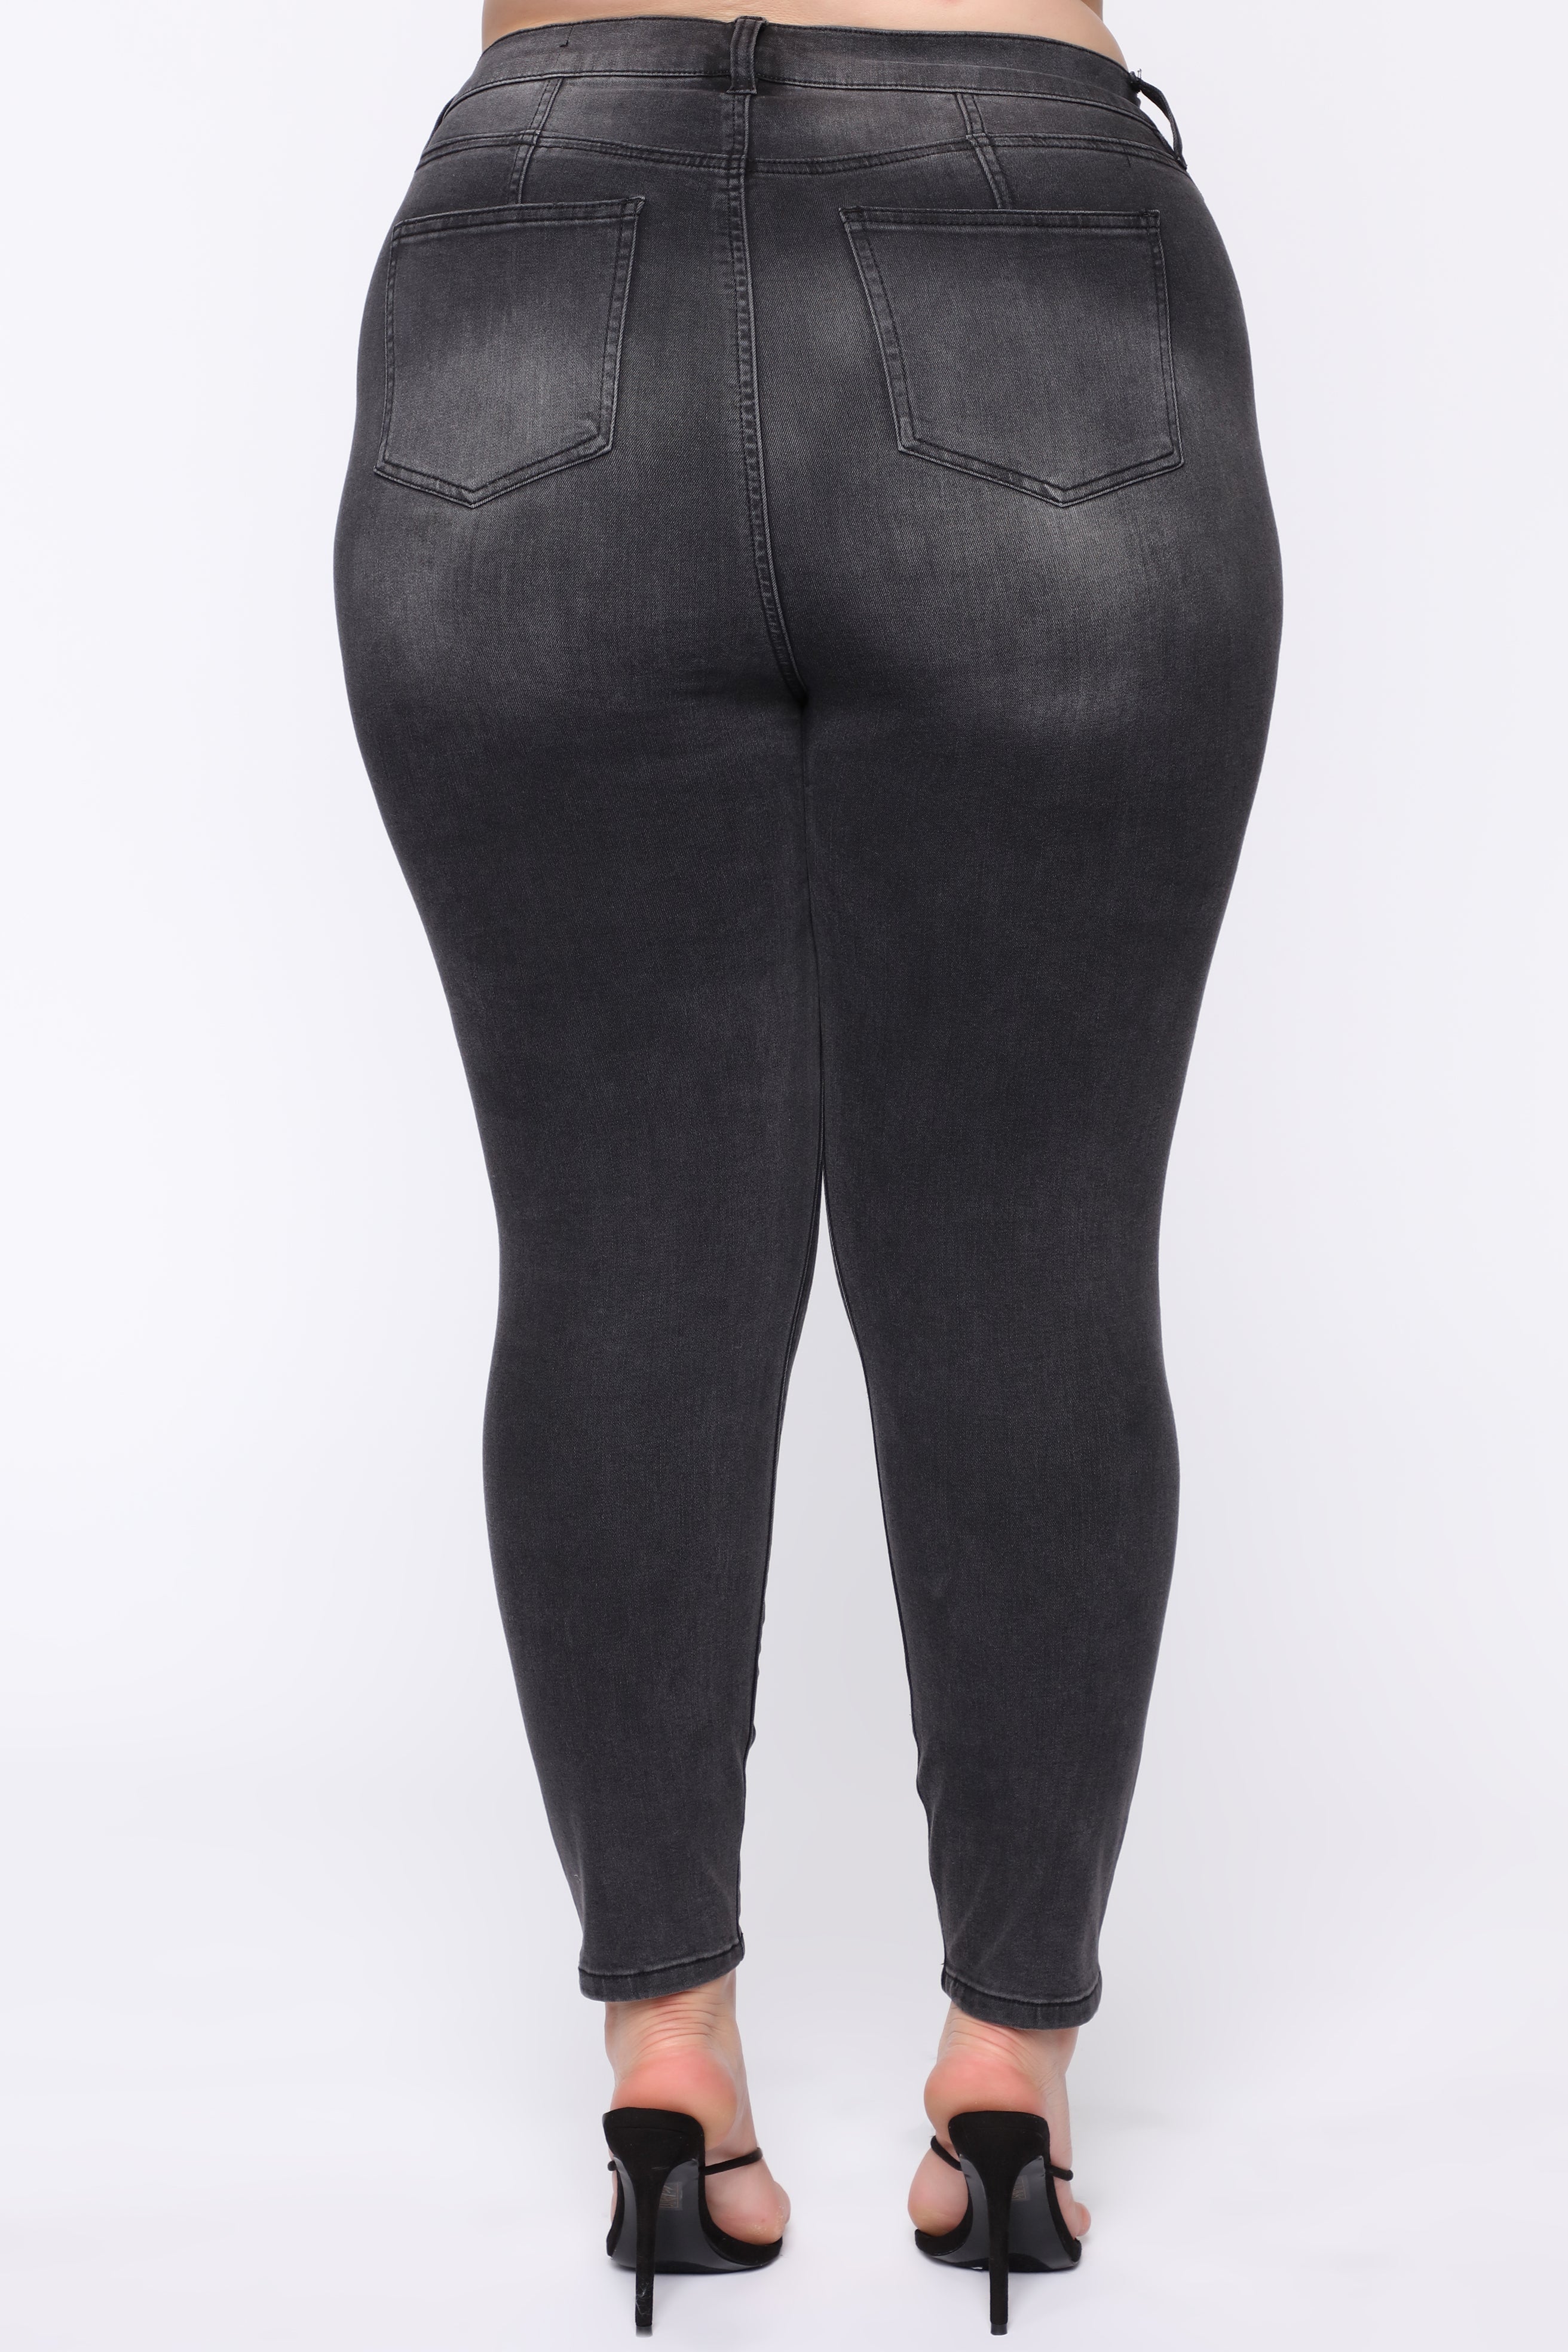 All For You High Rise Jeans - Black